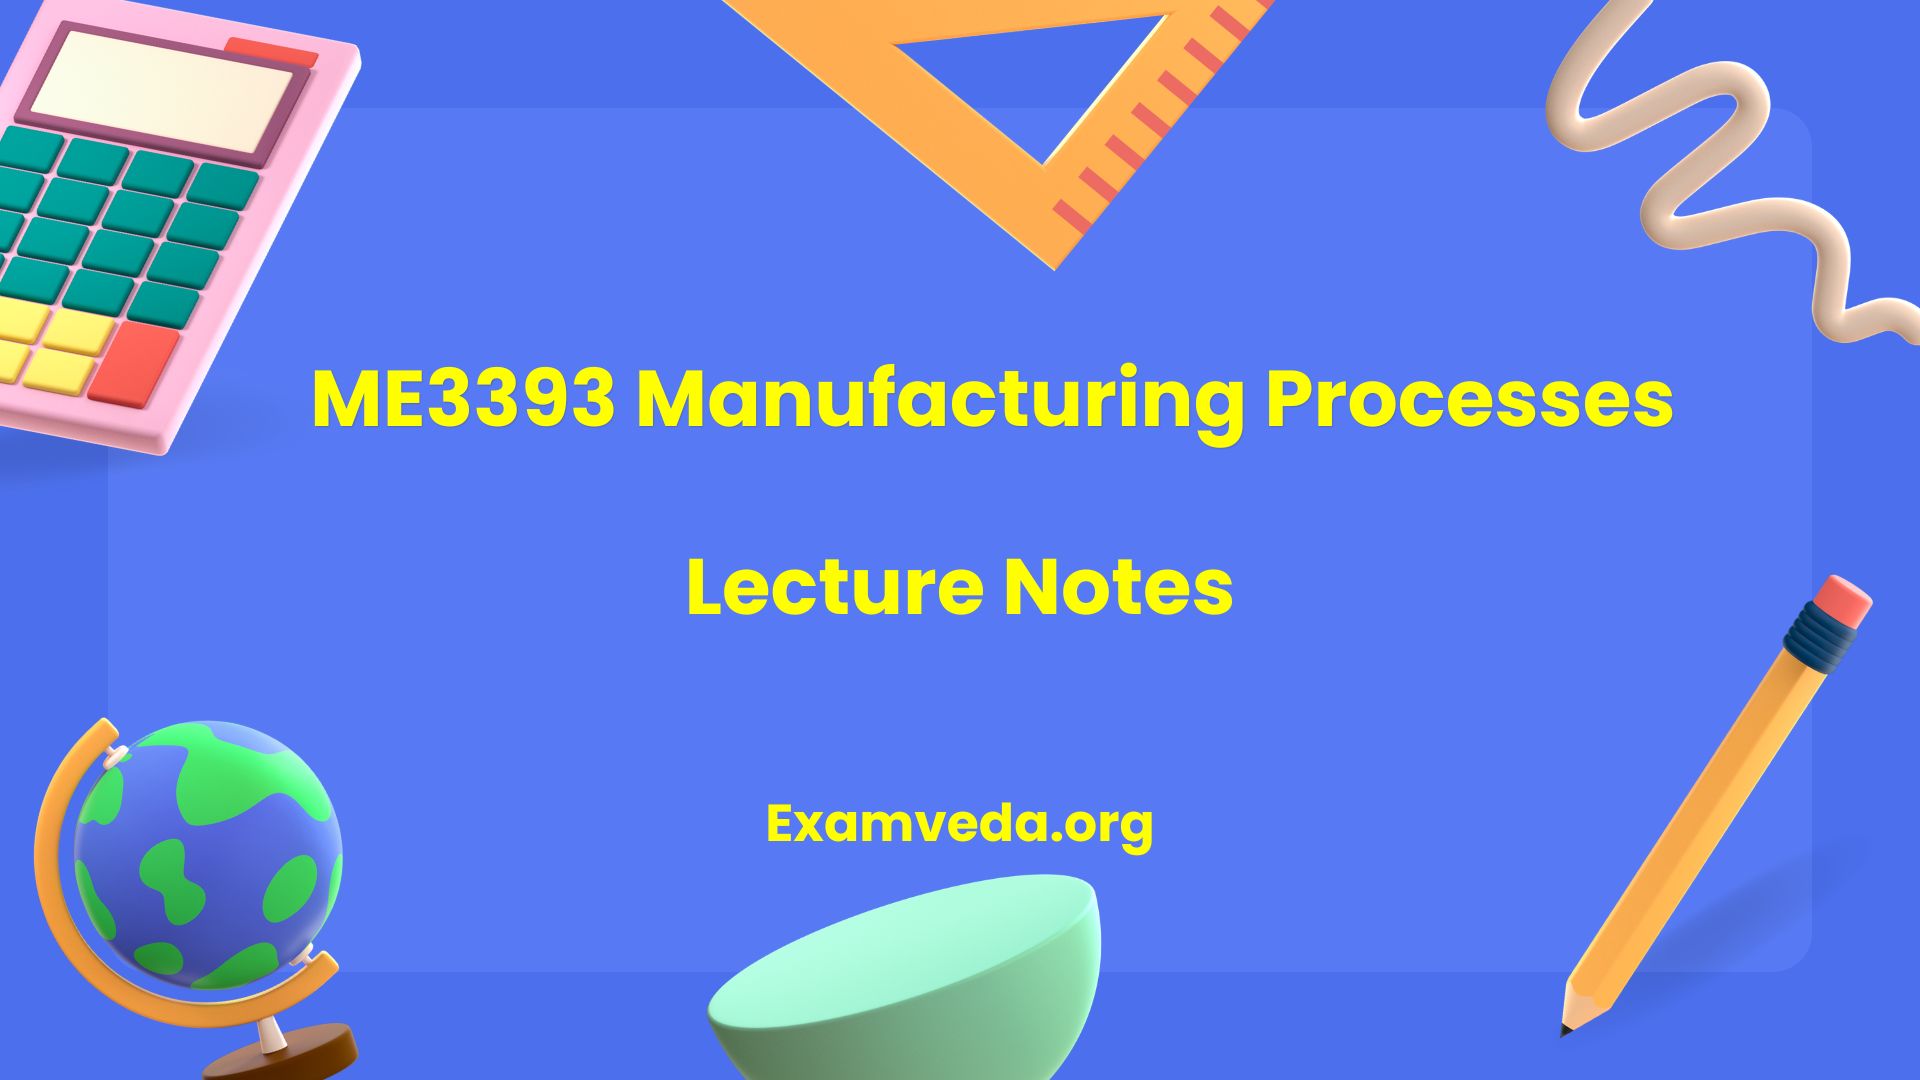 ME3393 Manufacturing Processes Lecture Notes